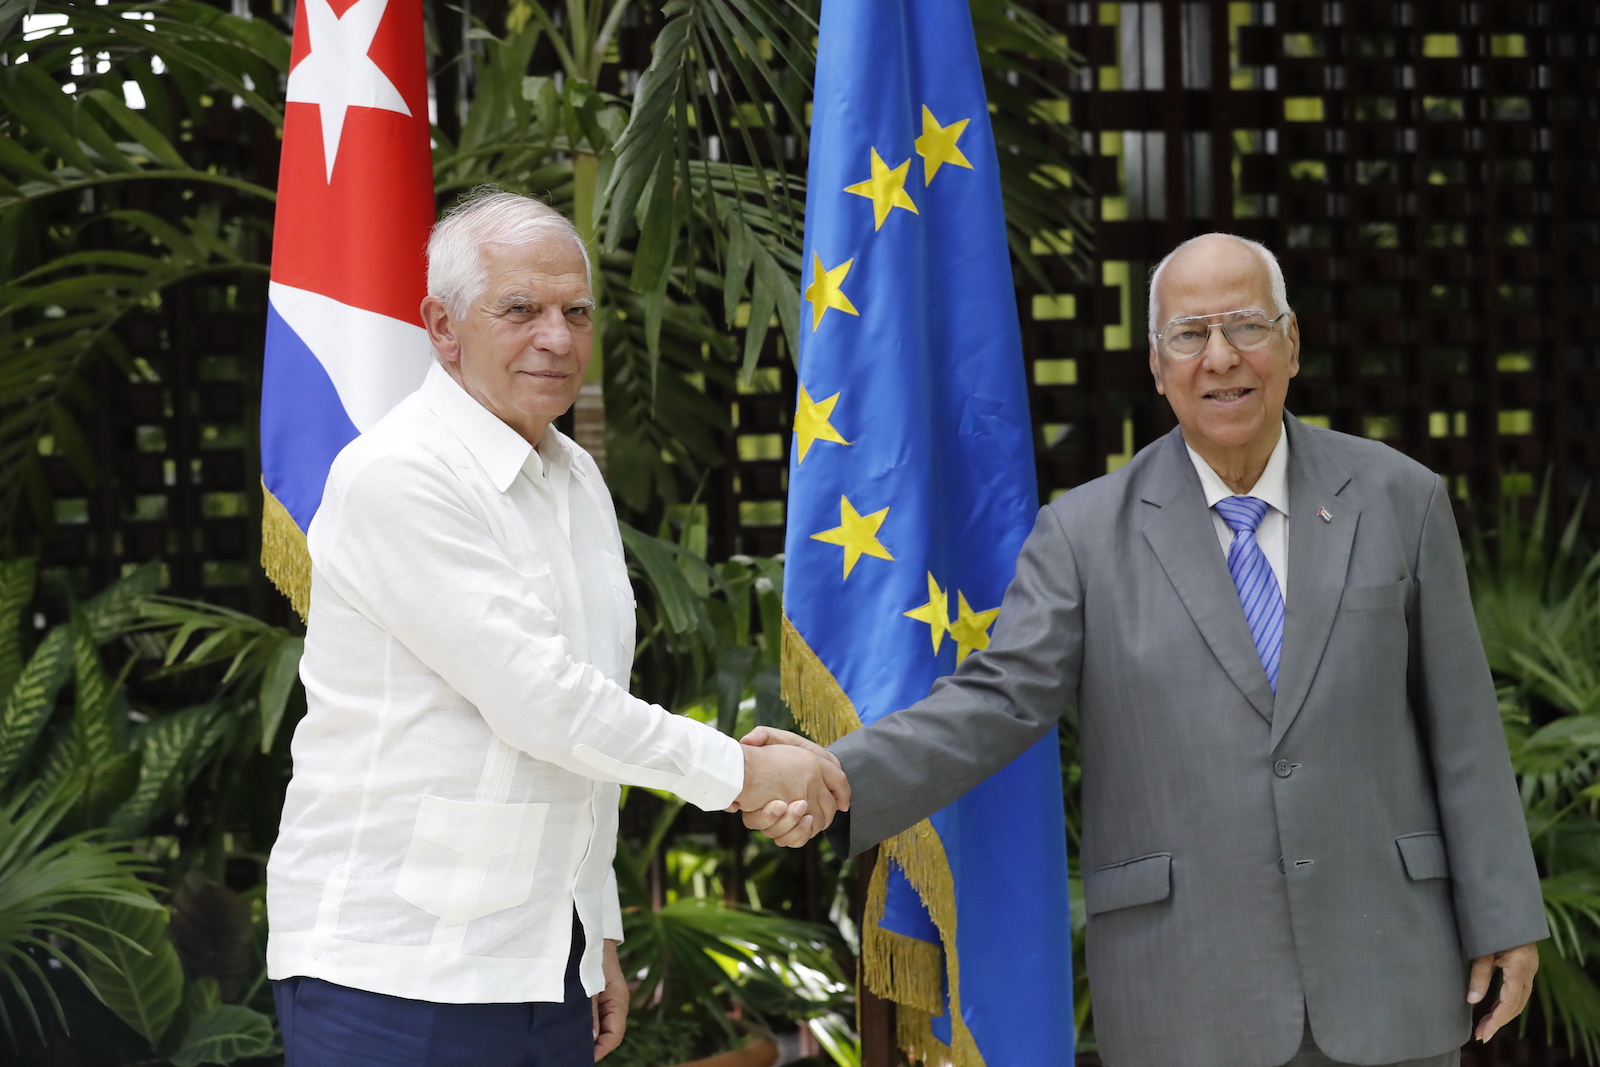 epa10655792 Ricardo Cabrisas (R), Cuban Deputy Prime Minister and Minister of Foreign Trade, receives the High Representative of the European Union (EU) for Foreign Affairs, Josep Borrell (L), upon his arrival at the 3rd Joint Council between the EU and Cuba, in Havana, Cuba, 26 May 2023. Borrell is visiting the island for a bilateral meeting framed in the Political Dialogue and Cooperation Agreement (ADPC) between the EU and Cuba, in force since 2017.  EPA/Ernesto Mastrascusa